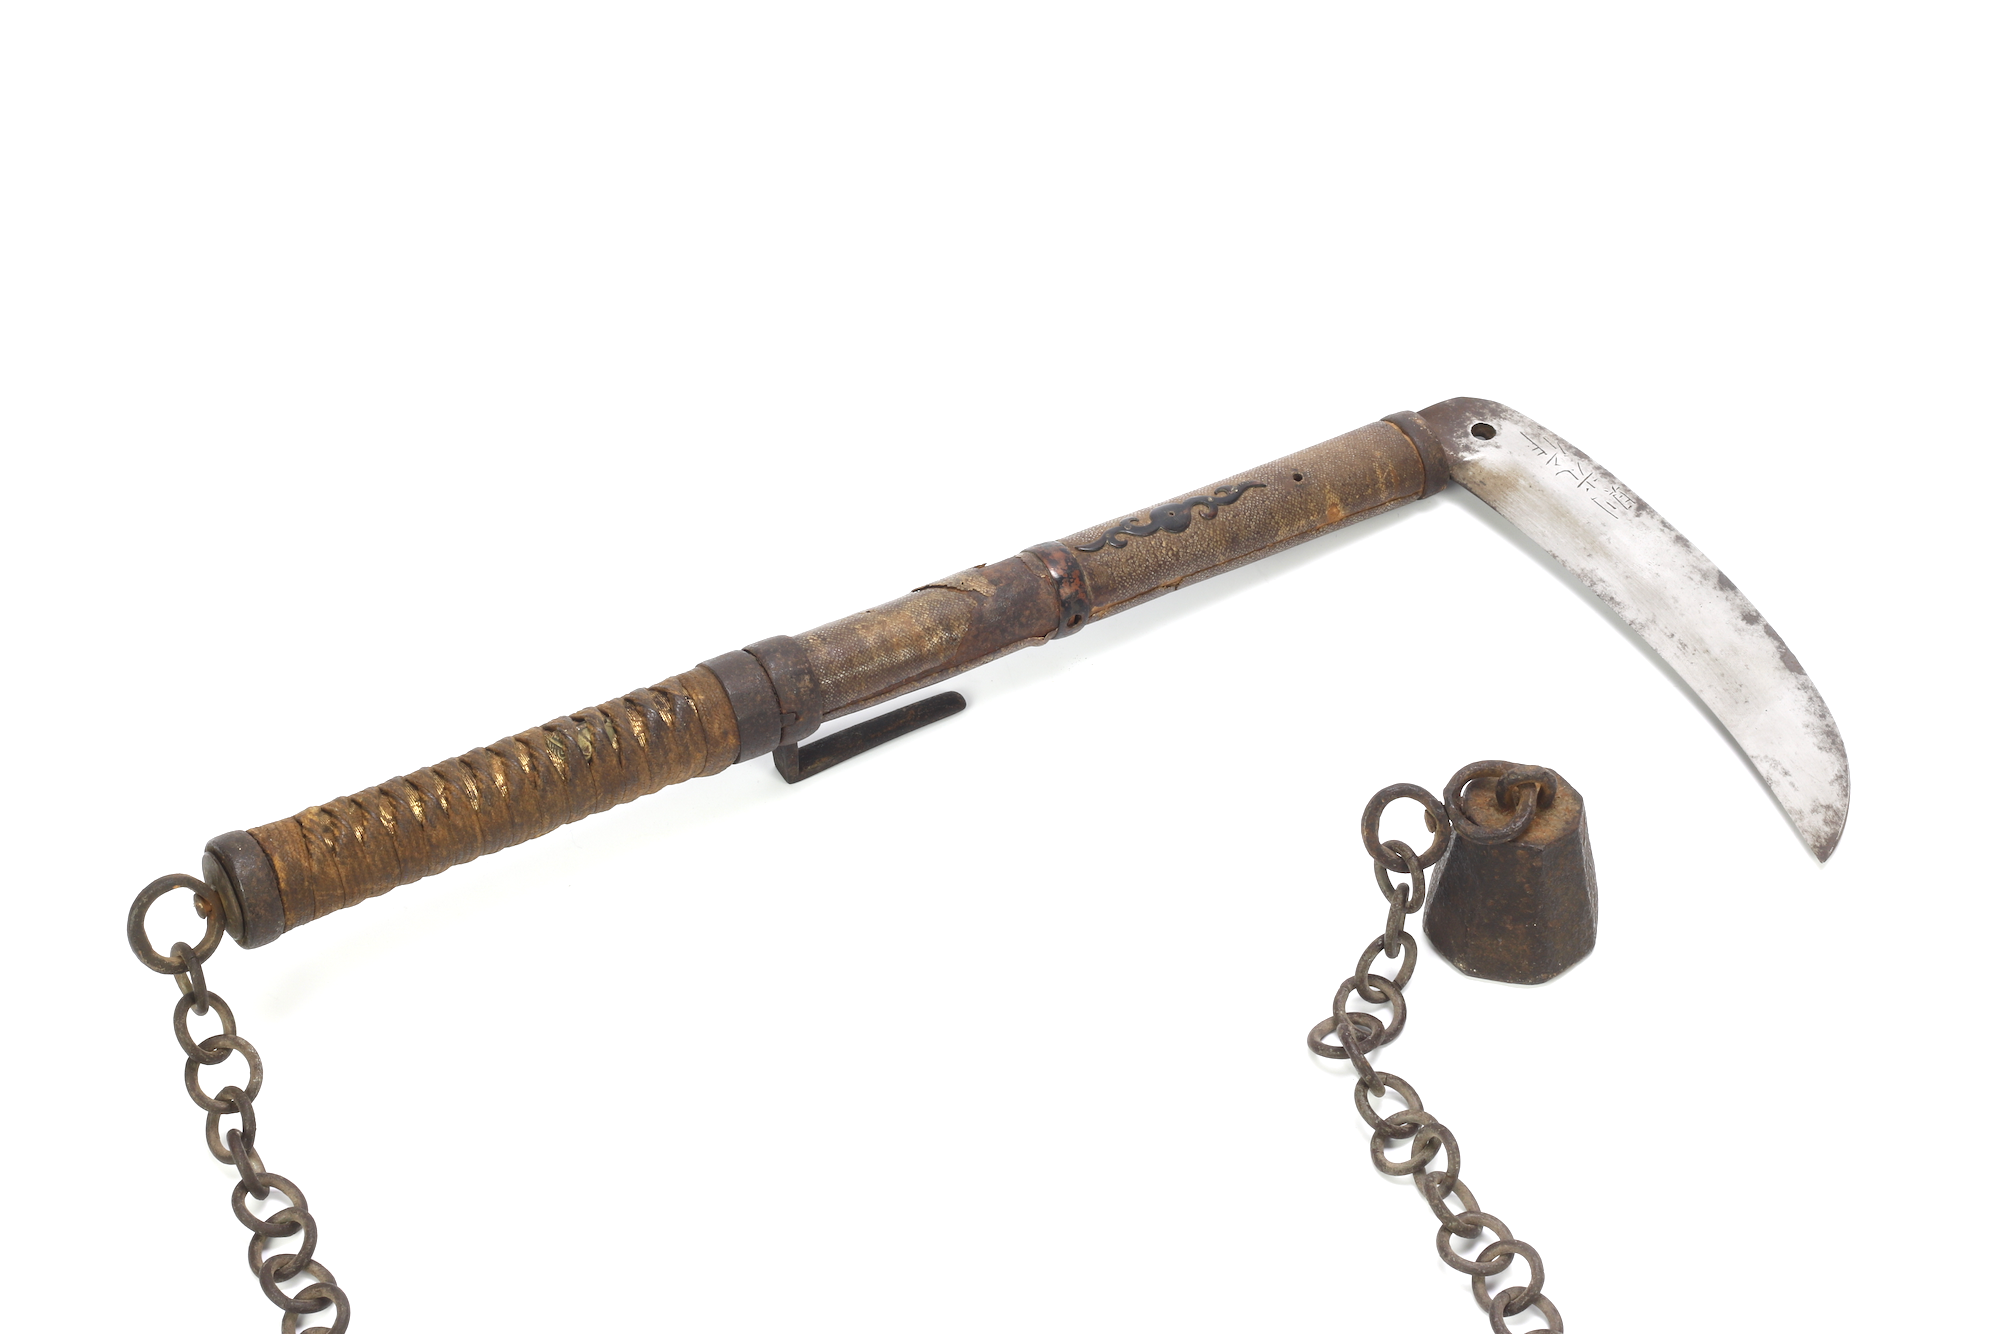 A Japanese kusarigama, scythe and chain weapon.